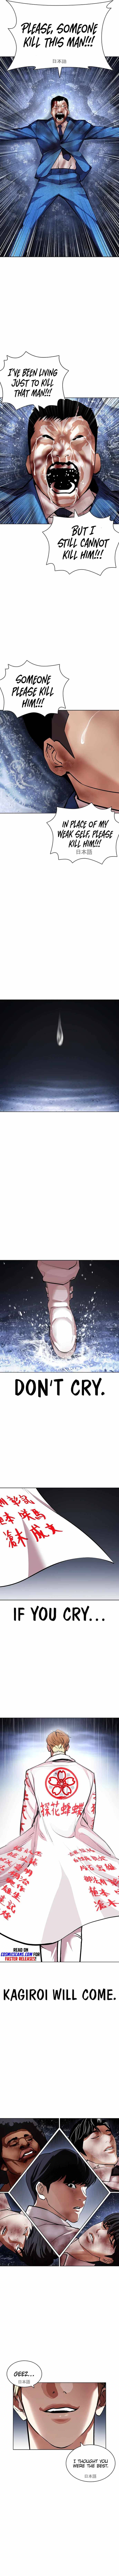 Lookism, Chapter 426